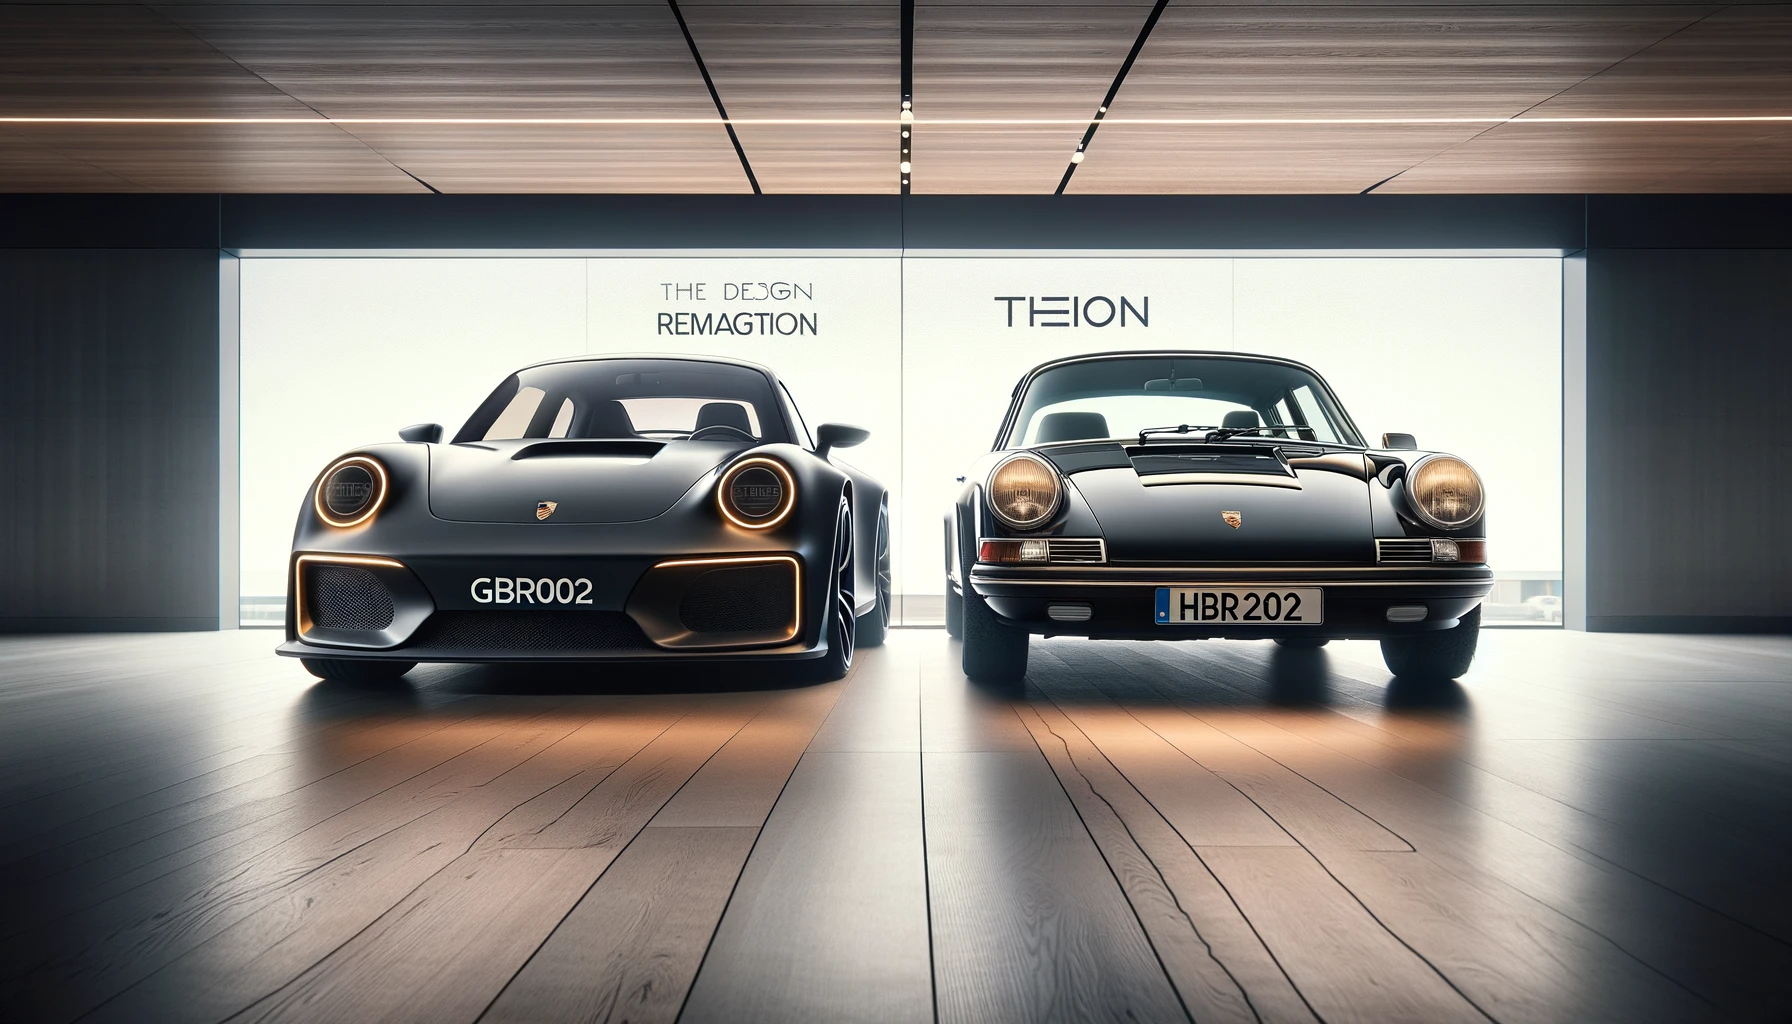 Comparative Image of GBR002 and Classic 911s